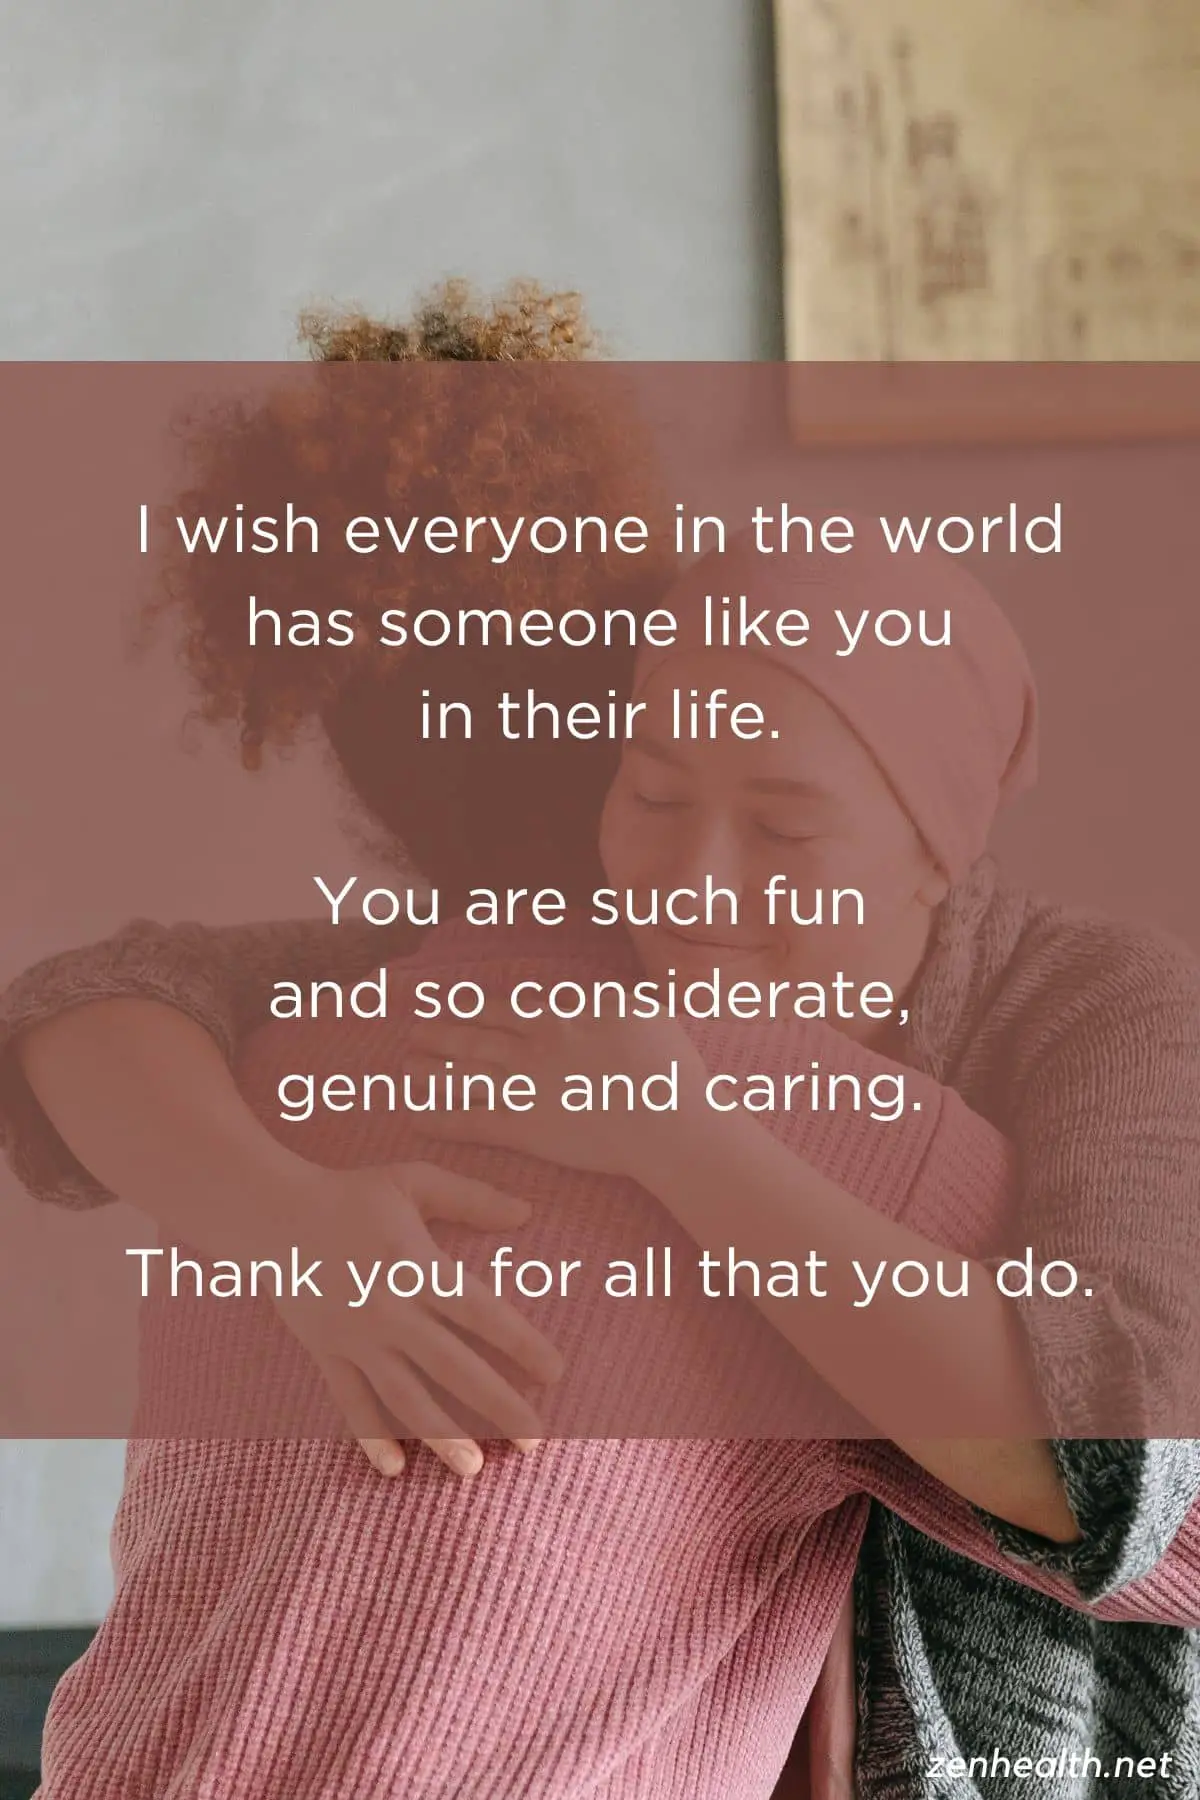 "I wish everyone in the world has someone like you in their life. You are such fun and so considerate, genuine and caring. Thank you for all that you do." text overlay on a photo of two women hugging